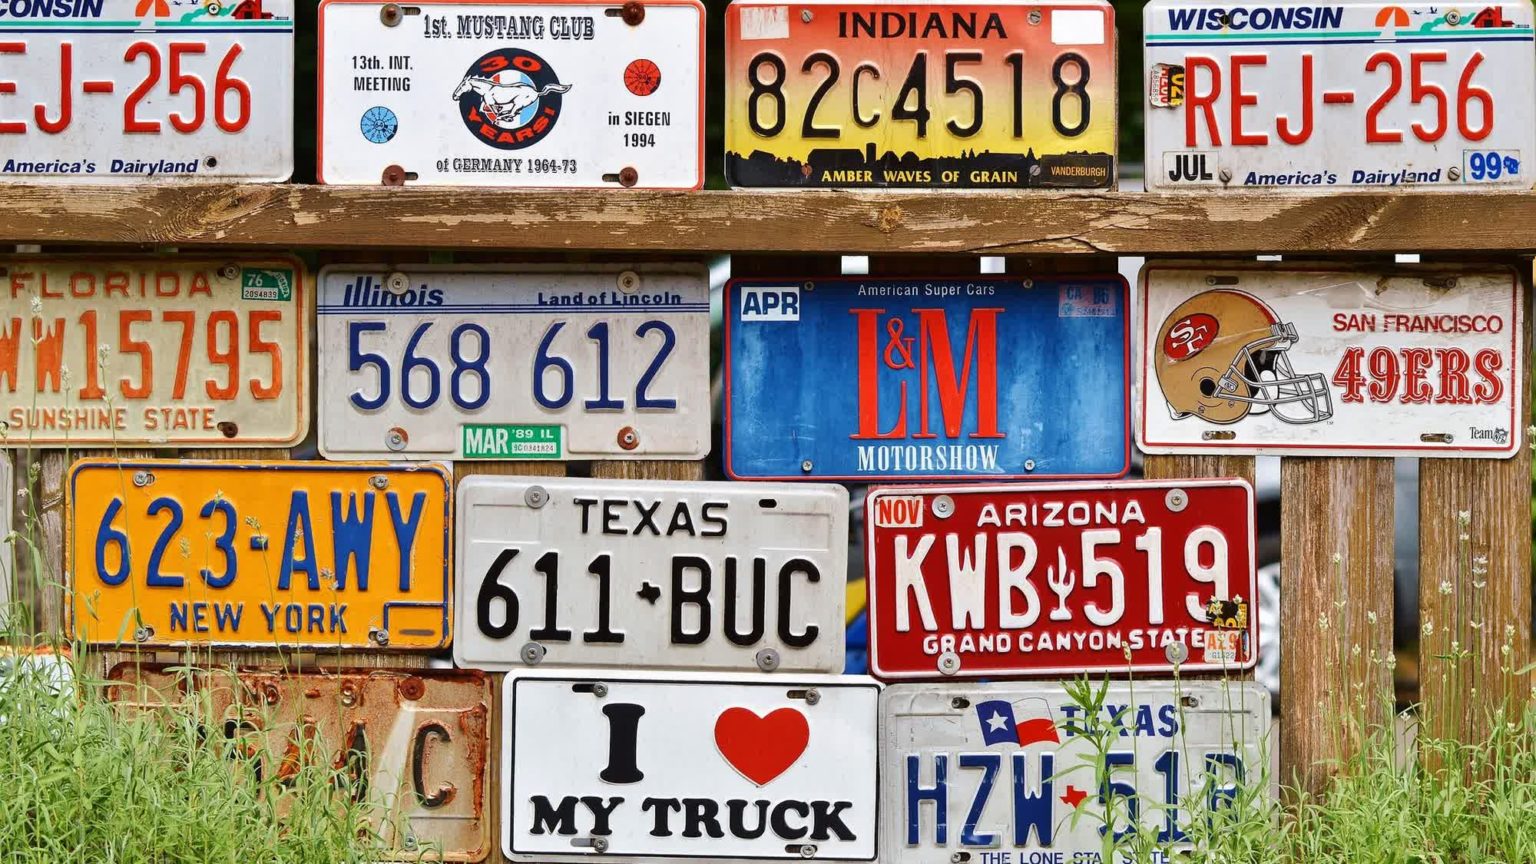 Class action suit filed over license plate data, allegedly violating the privacy of millions of California drivers